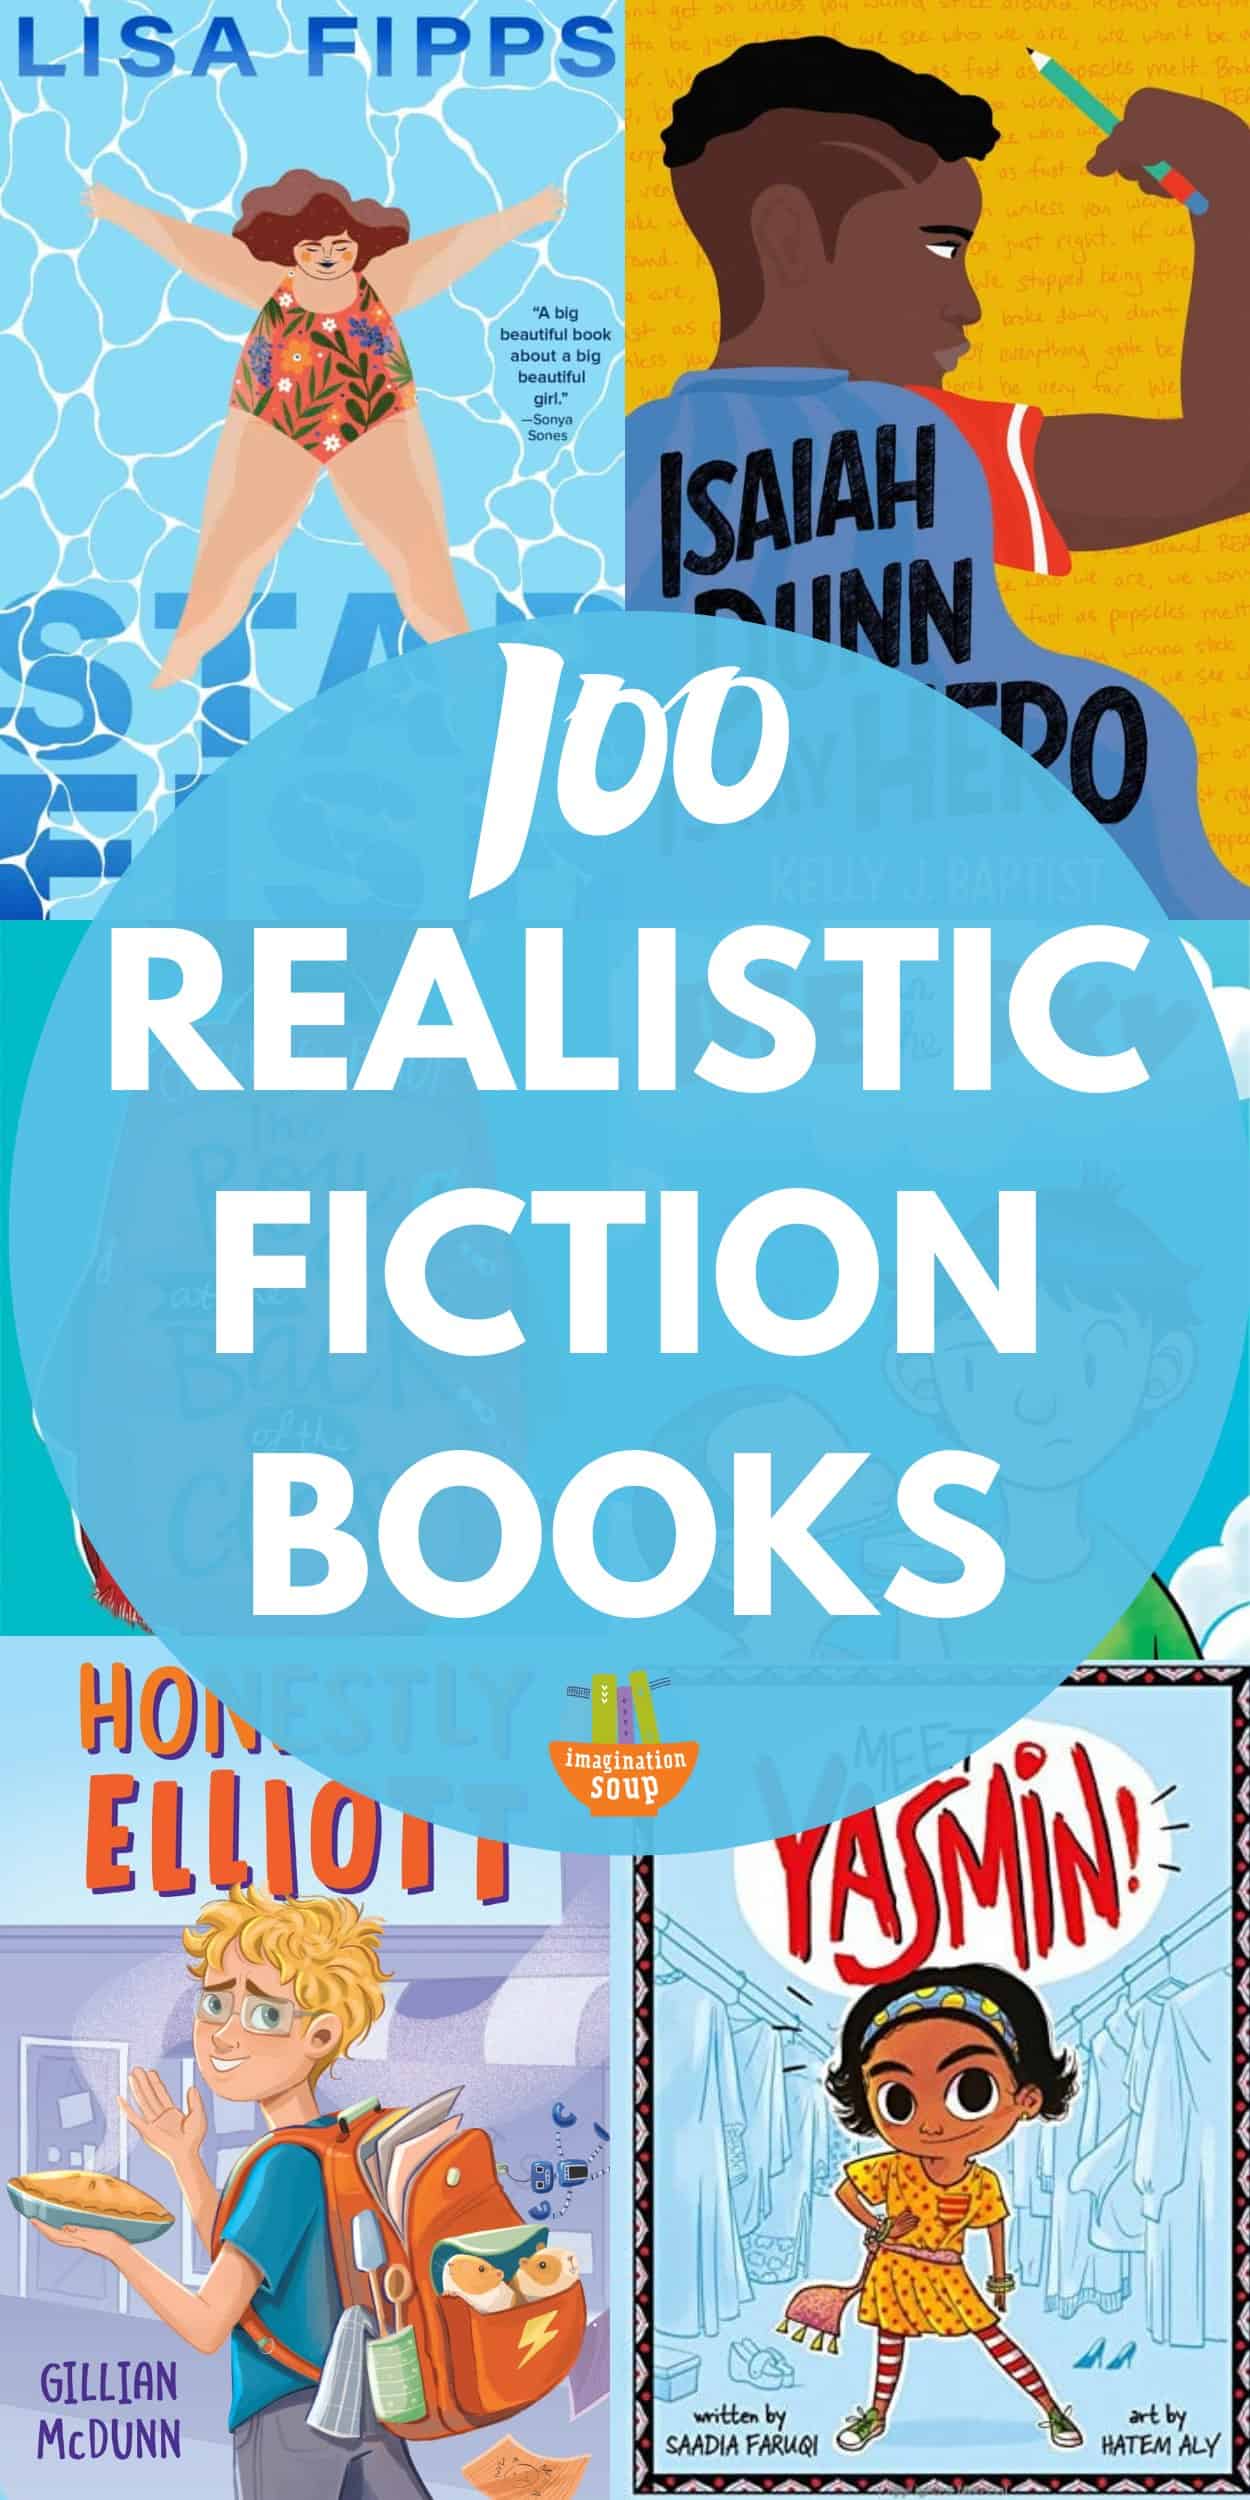 Realistic fiction books for kids start include excellent chapter books, relatable middle grade books, and compelling YA novels. Realistic fiction is either relatable to children’s own lives (mirrors) or builds empathy as readers walk in the shoes of another (doors.) But which titles are the best choices for readers? That's how this list can help! 

I have read all these recommended books. My reviews can help you decide if the book is right for your reader.